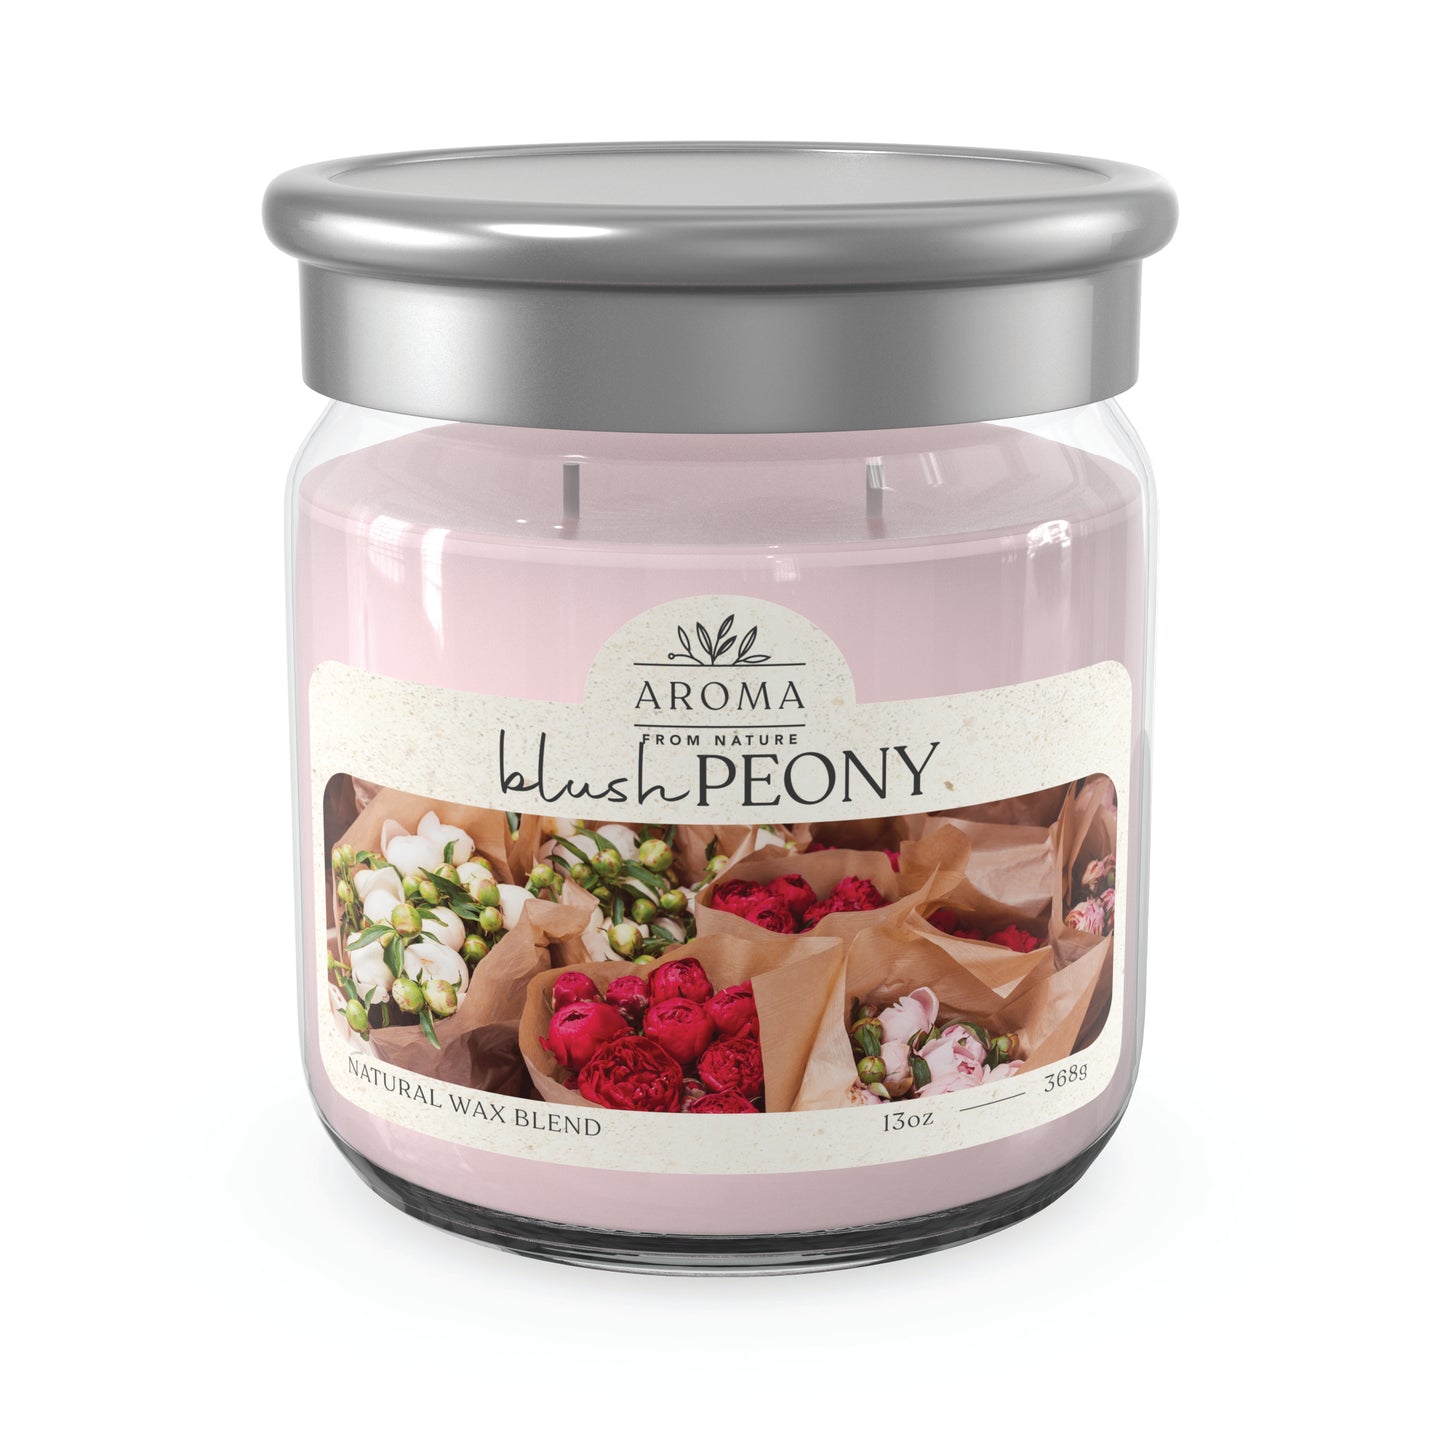 Aroma From Nature - 13 oz Scented Wax - Blush Peany